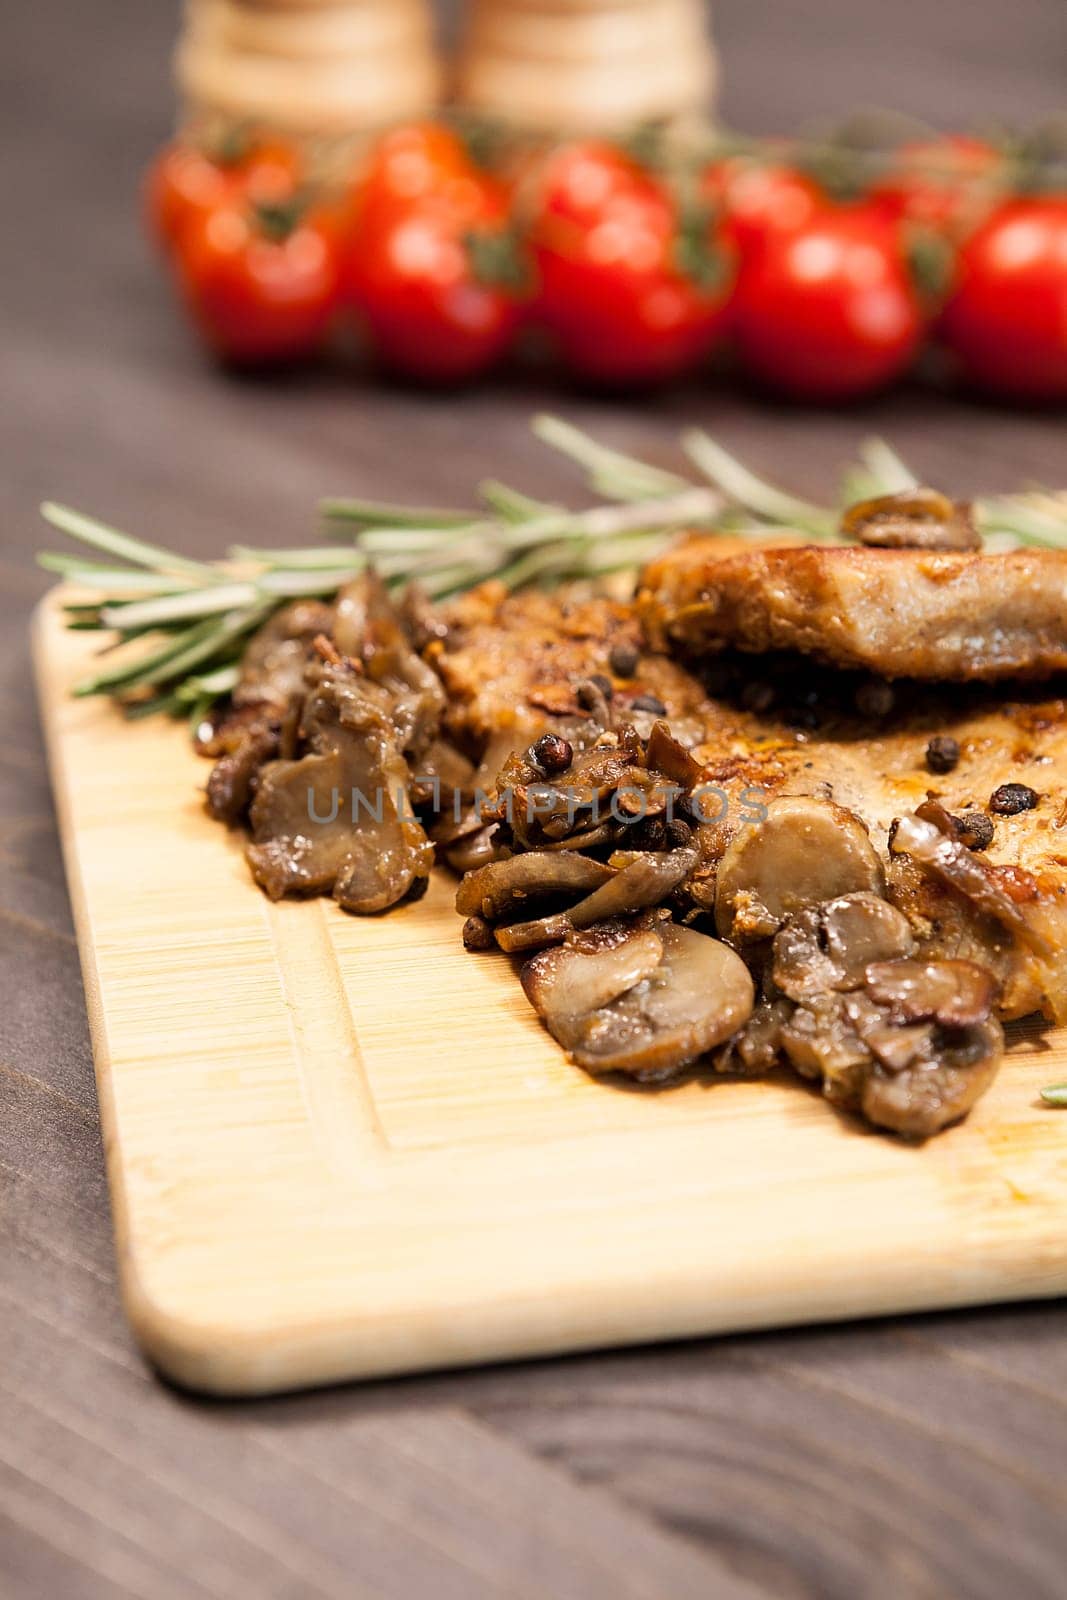 Close up image on pork steak on wooden board next to grilled mushrooms and cherry tomatoes